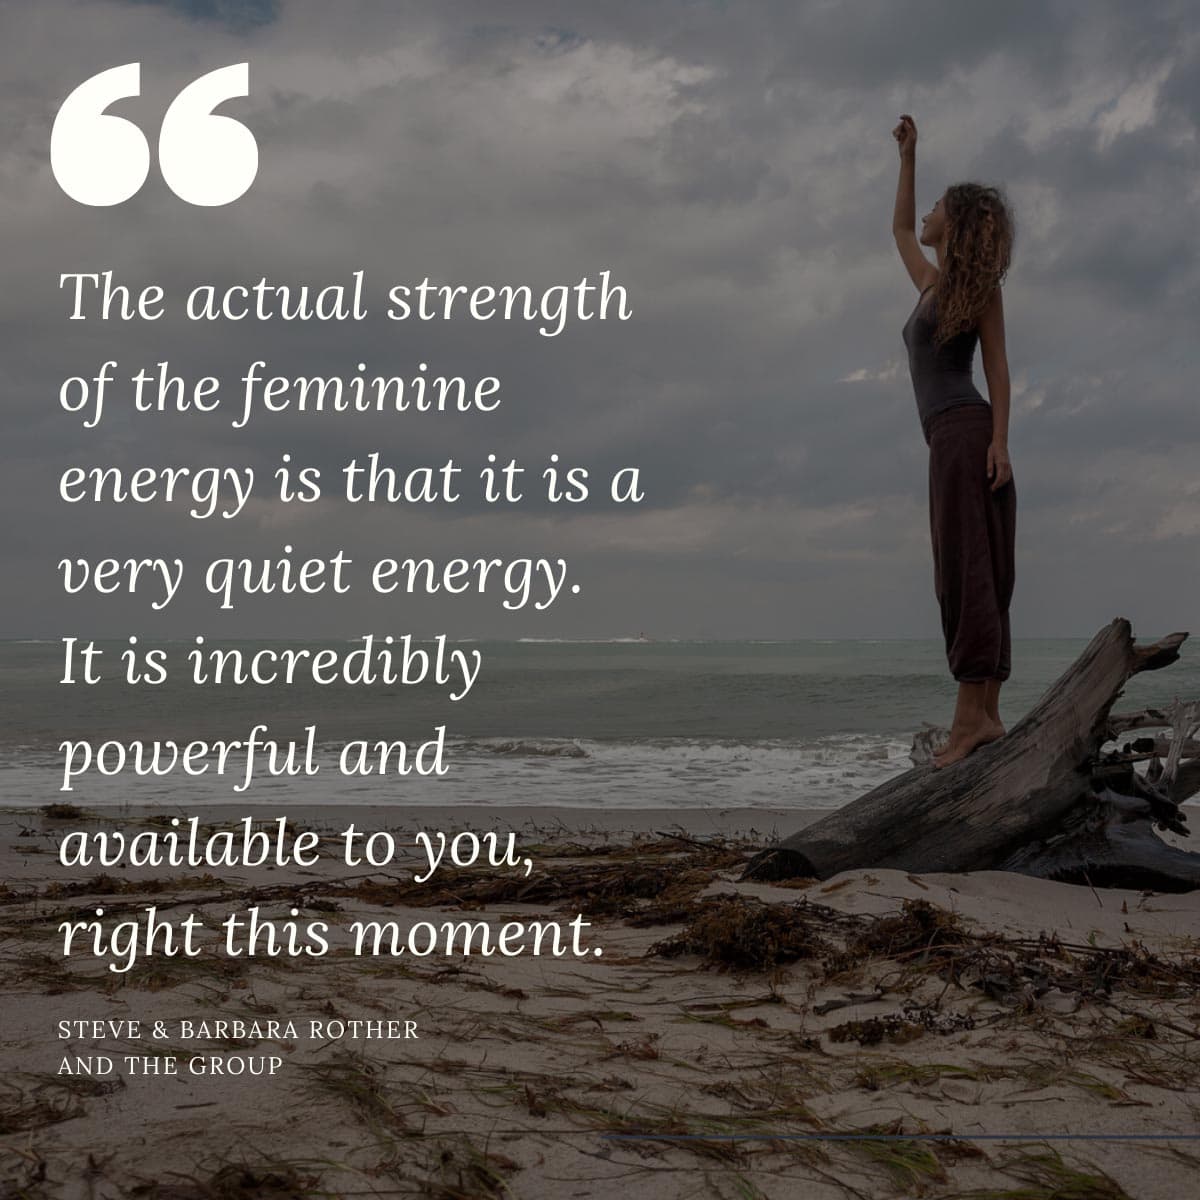 Feminine energy Quotes Steve & Barbara Rother and the group